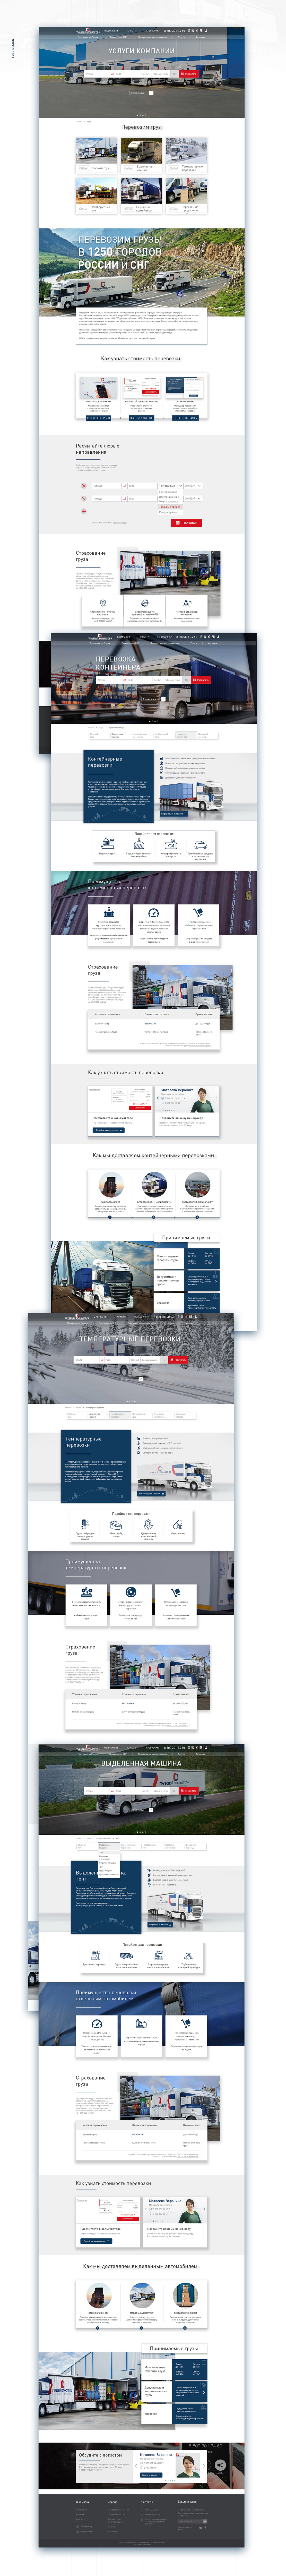 UI ux wed-design Interface logistic company corporate web site services 404 page docs Contacts